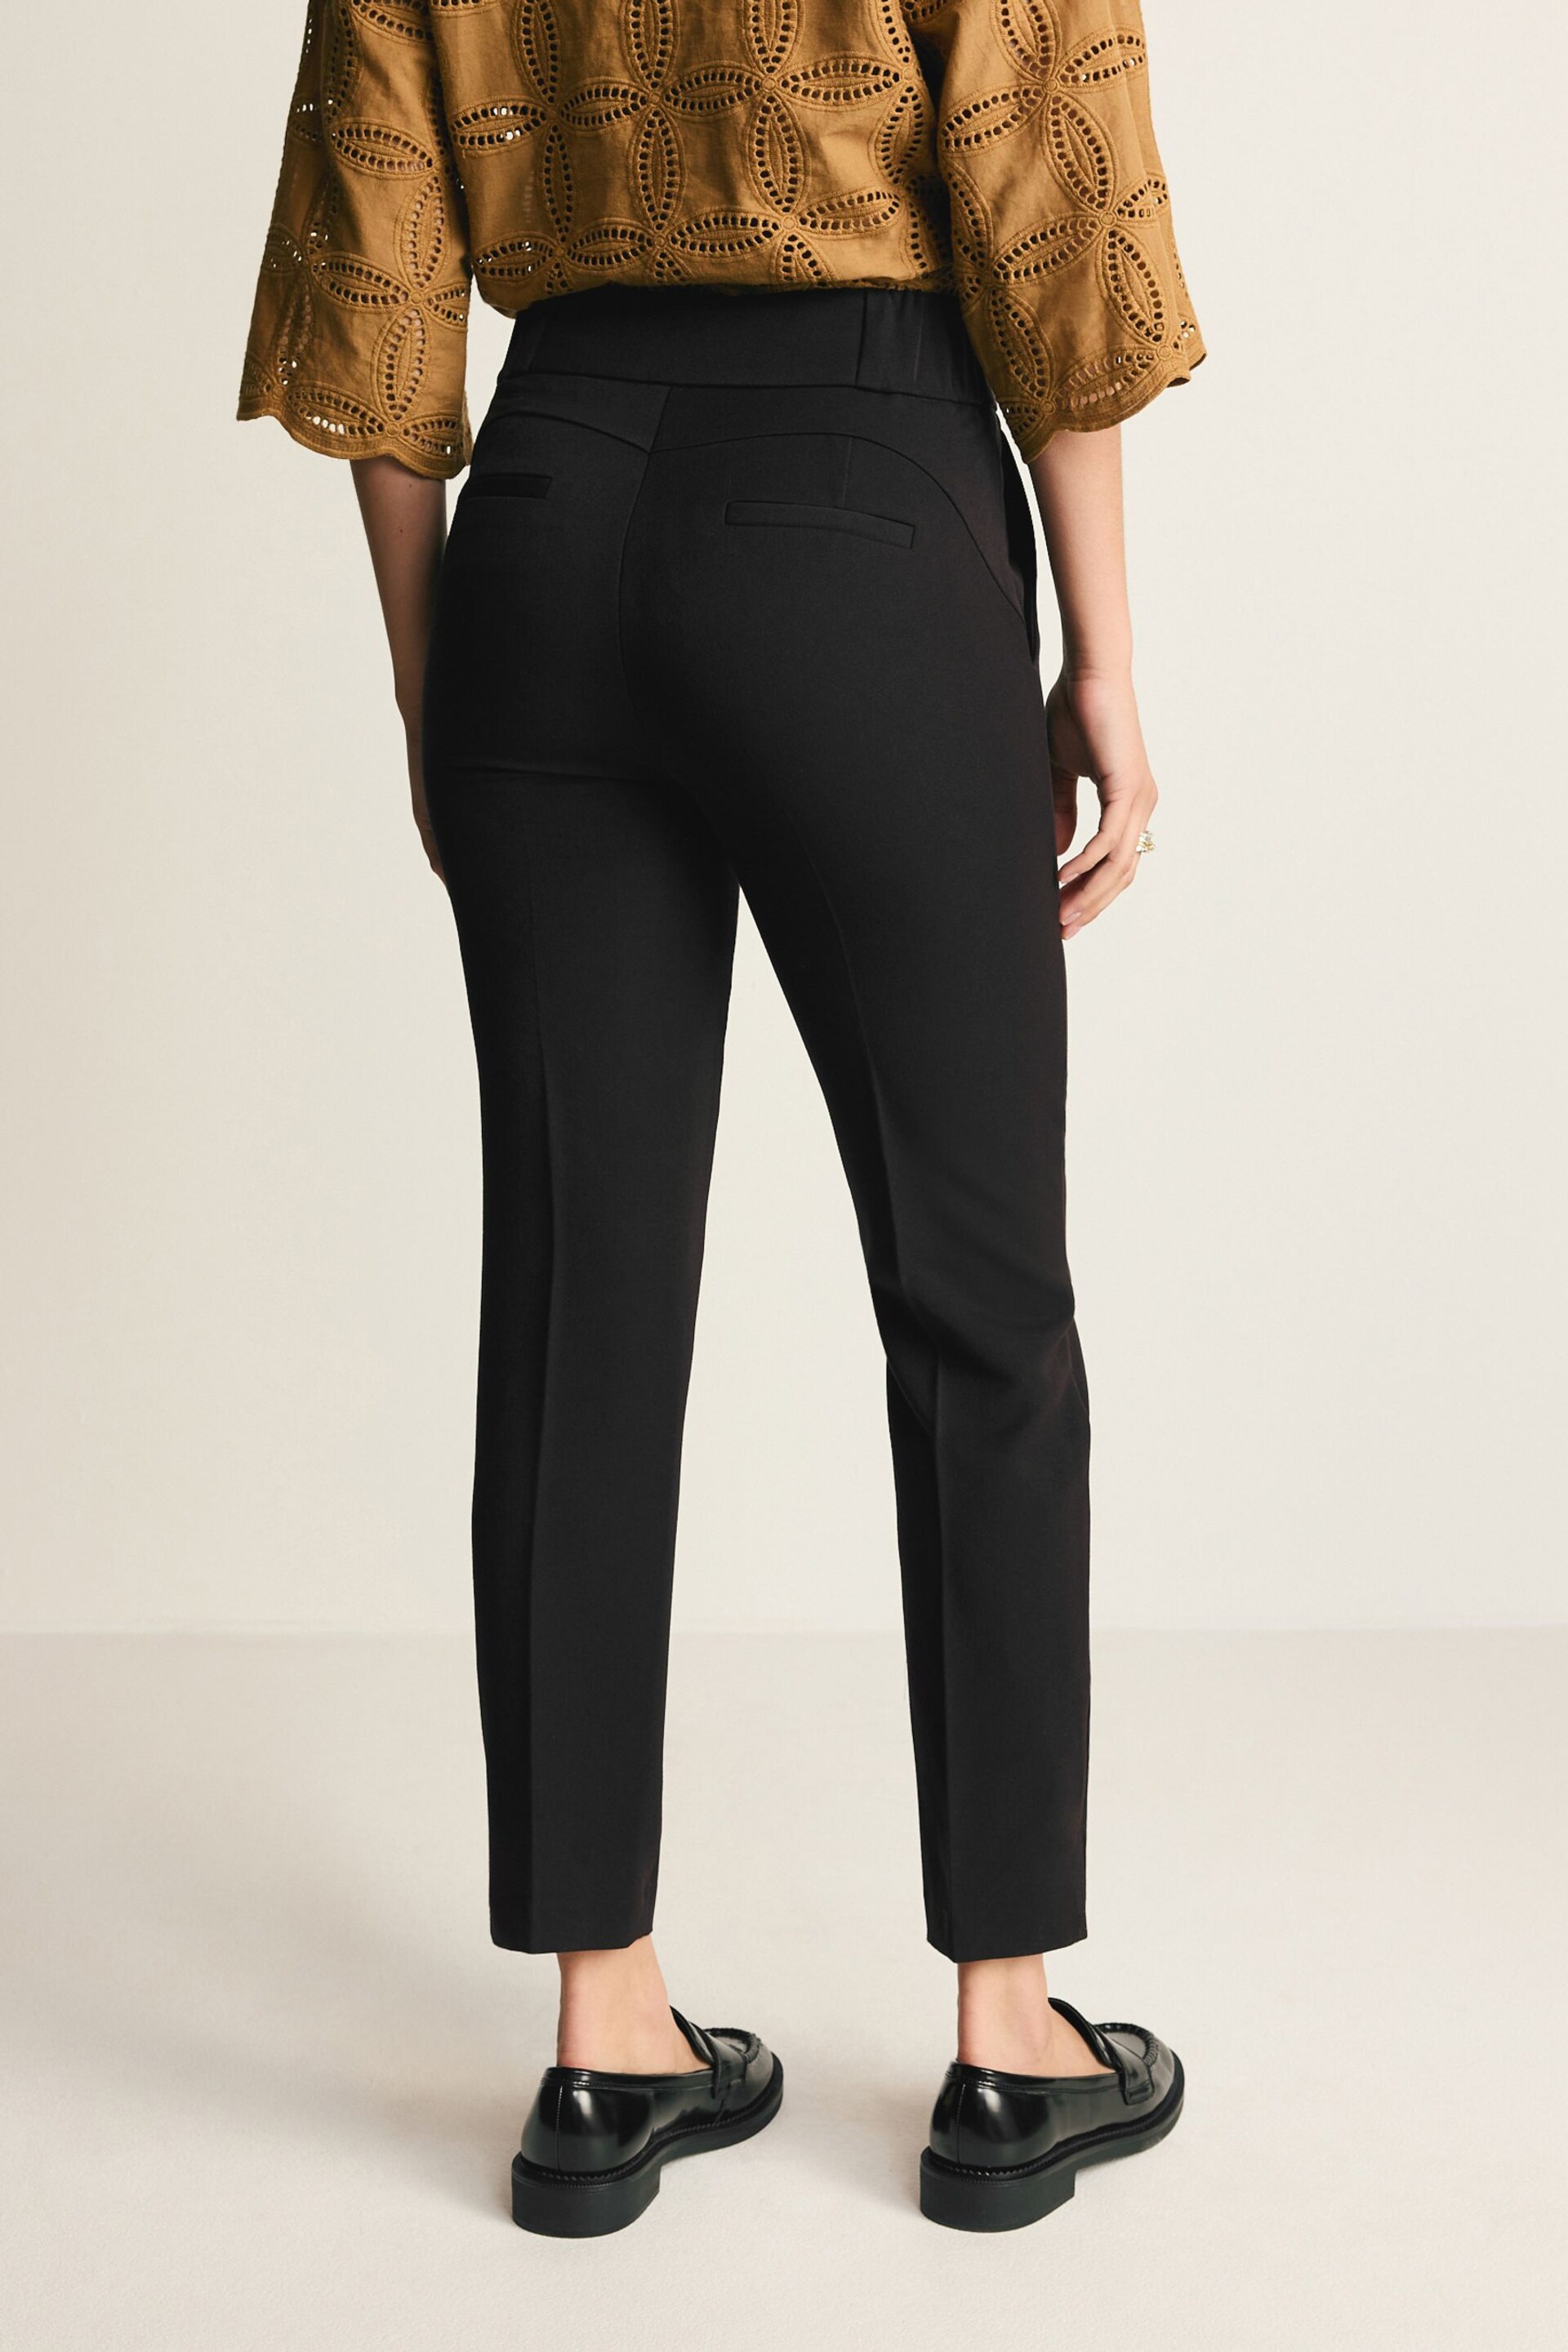 Black Slim Tailored Trousers - Image 3 of 6